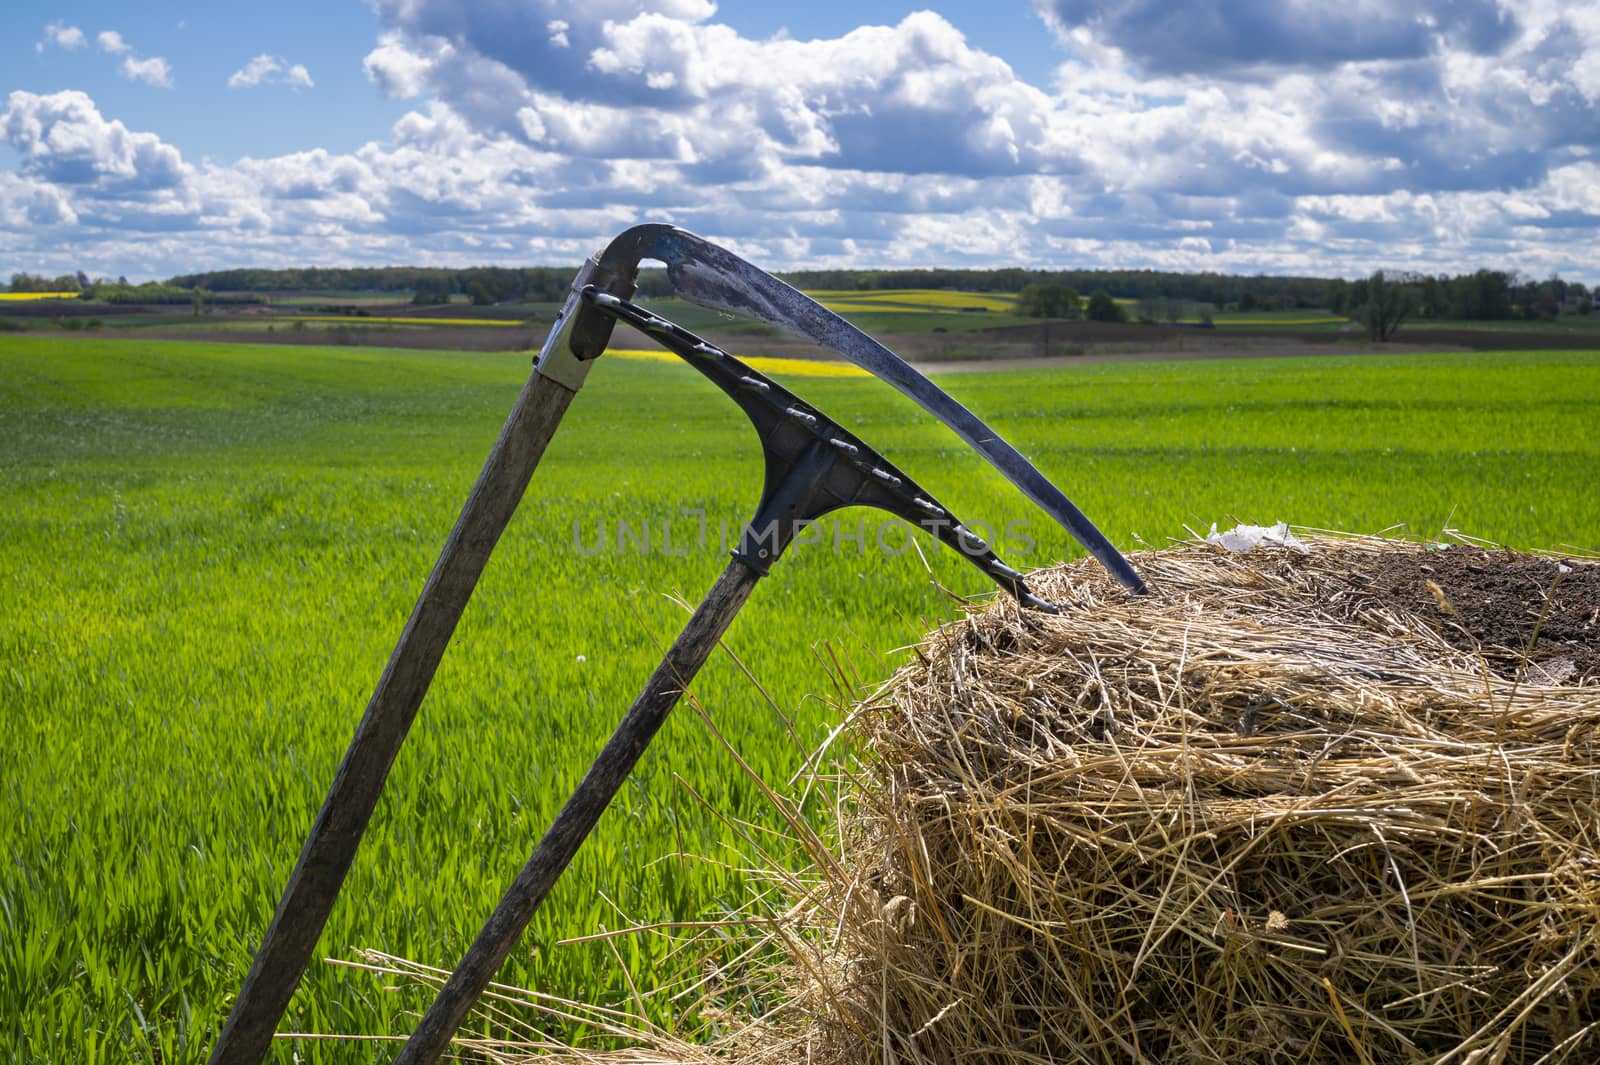 Rake and scythe on dried straw in an agricultural field in spring viewed in close up on the tools